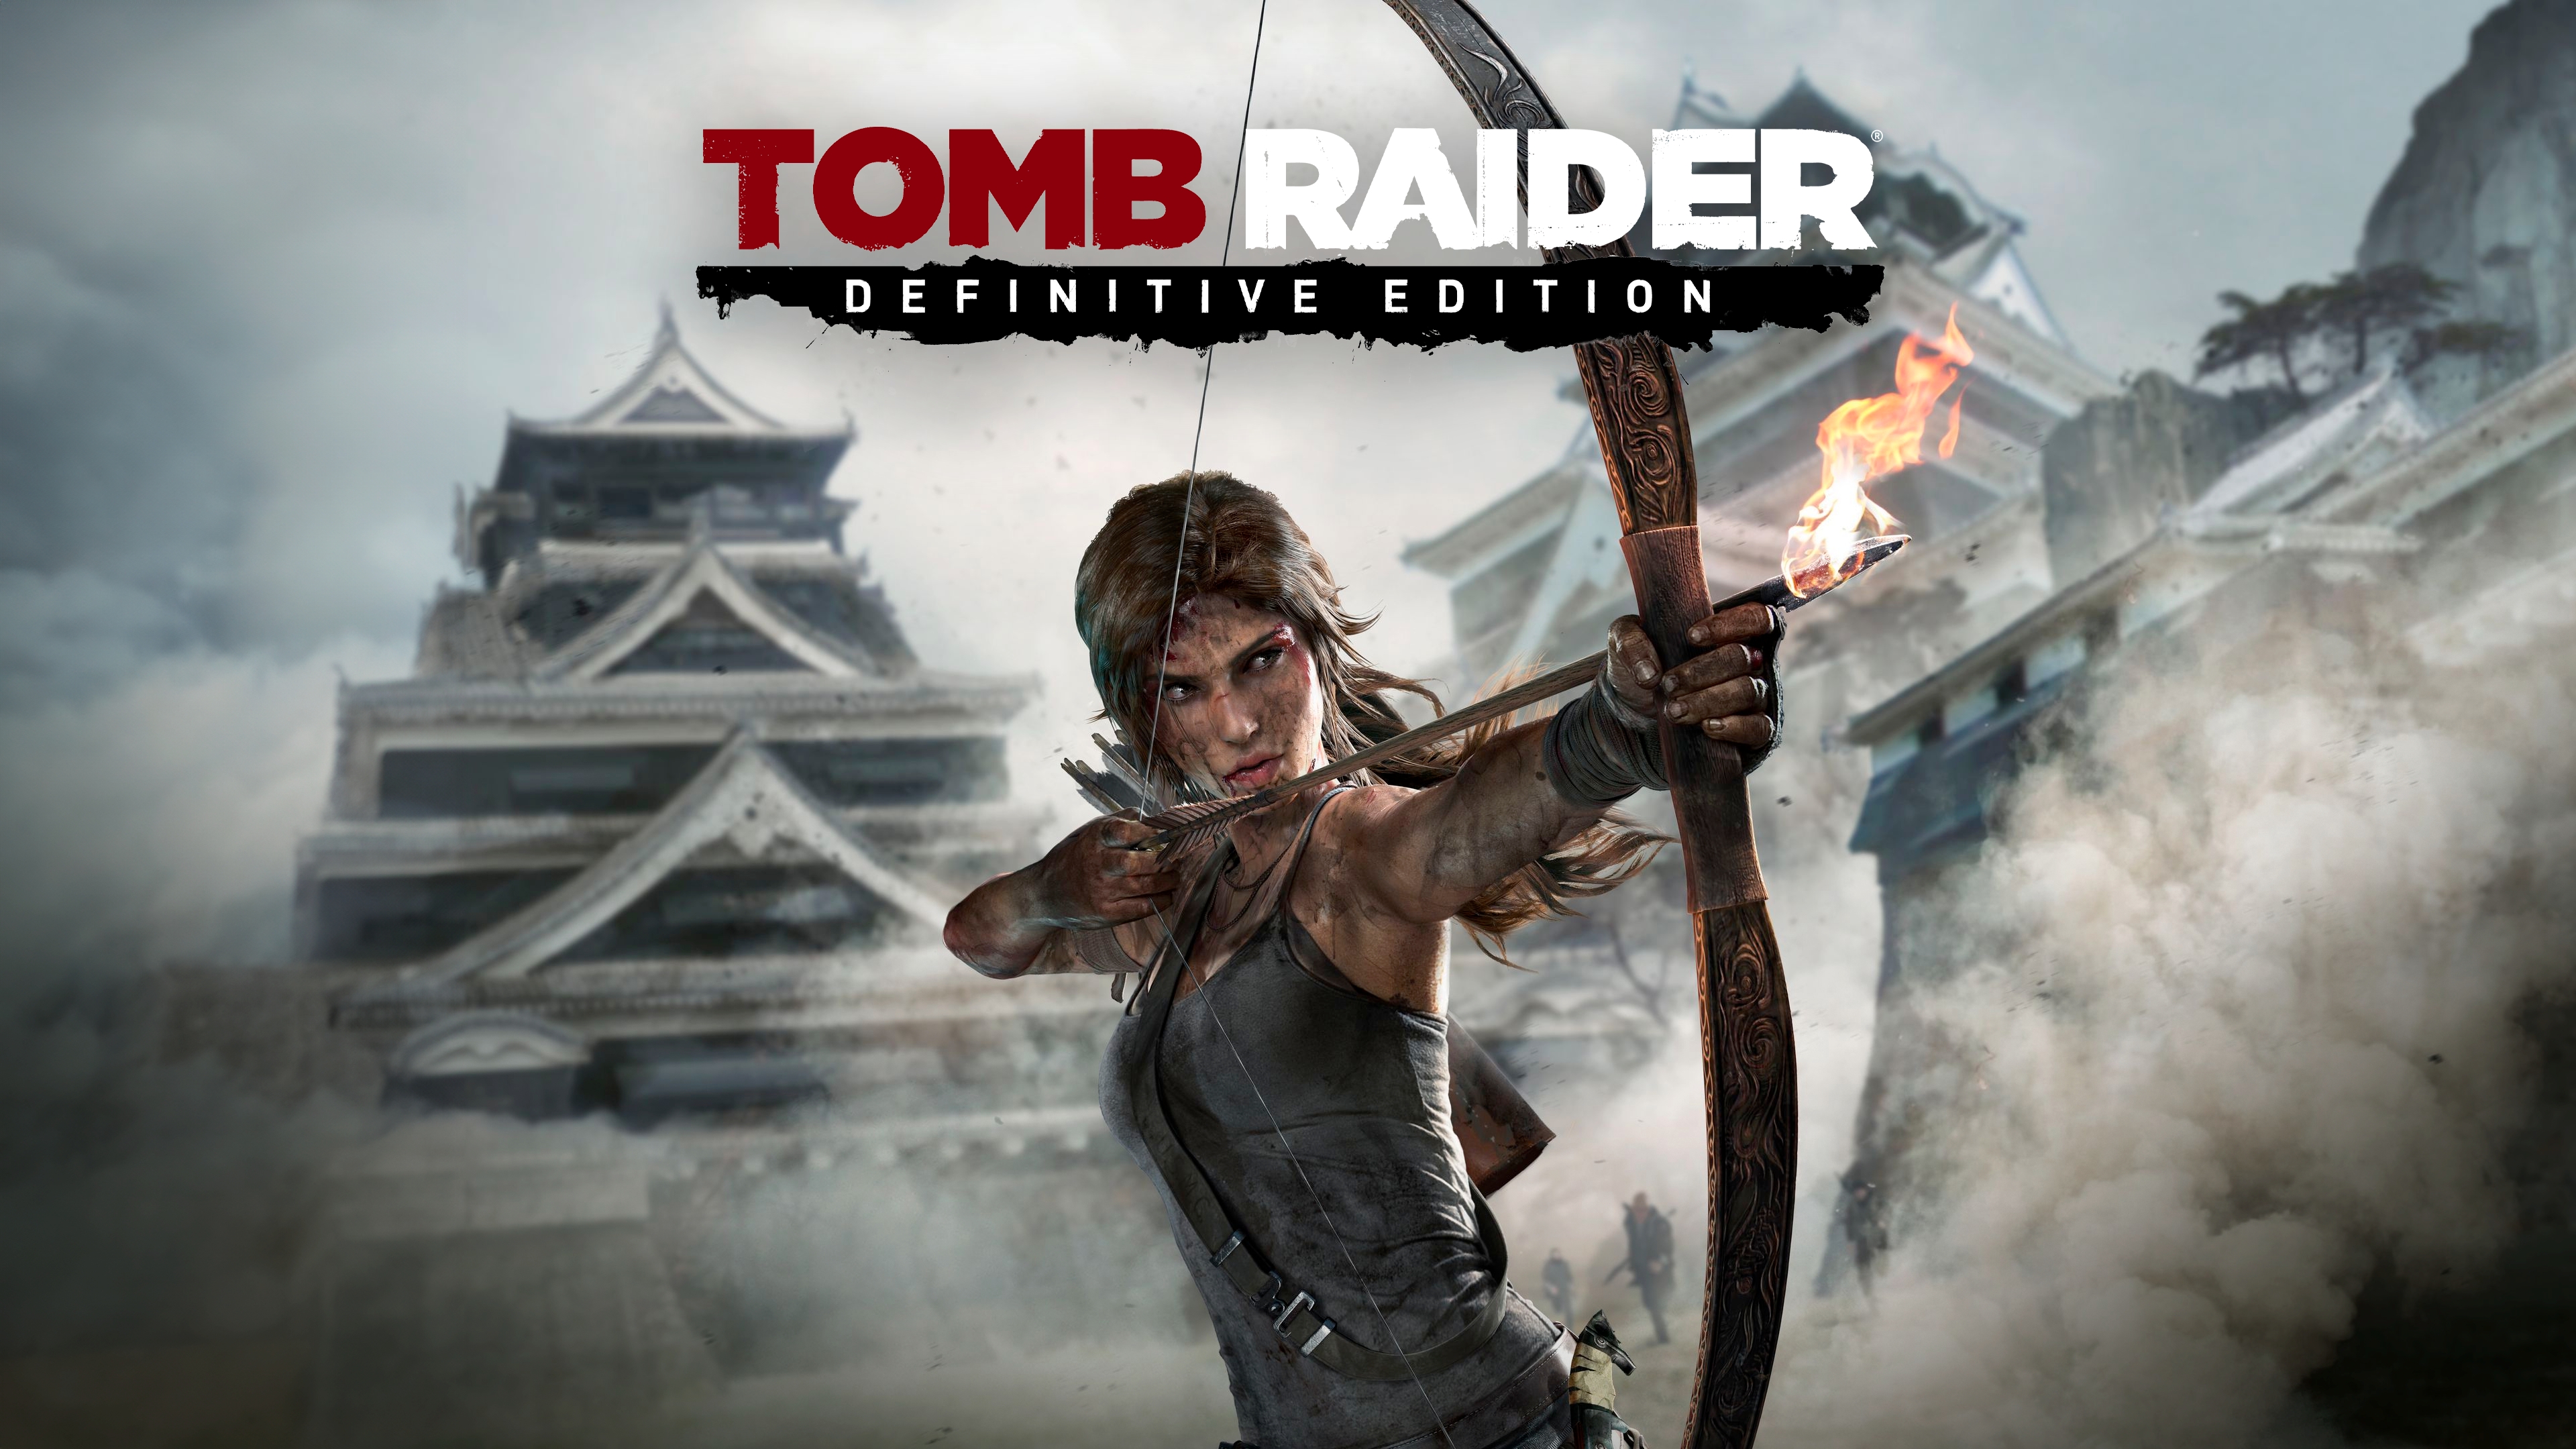 tomb raider definitive edition pc with xbox controller